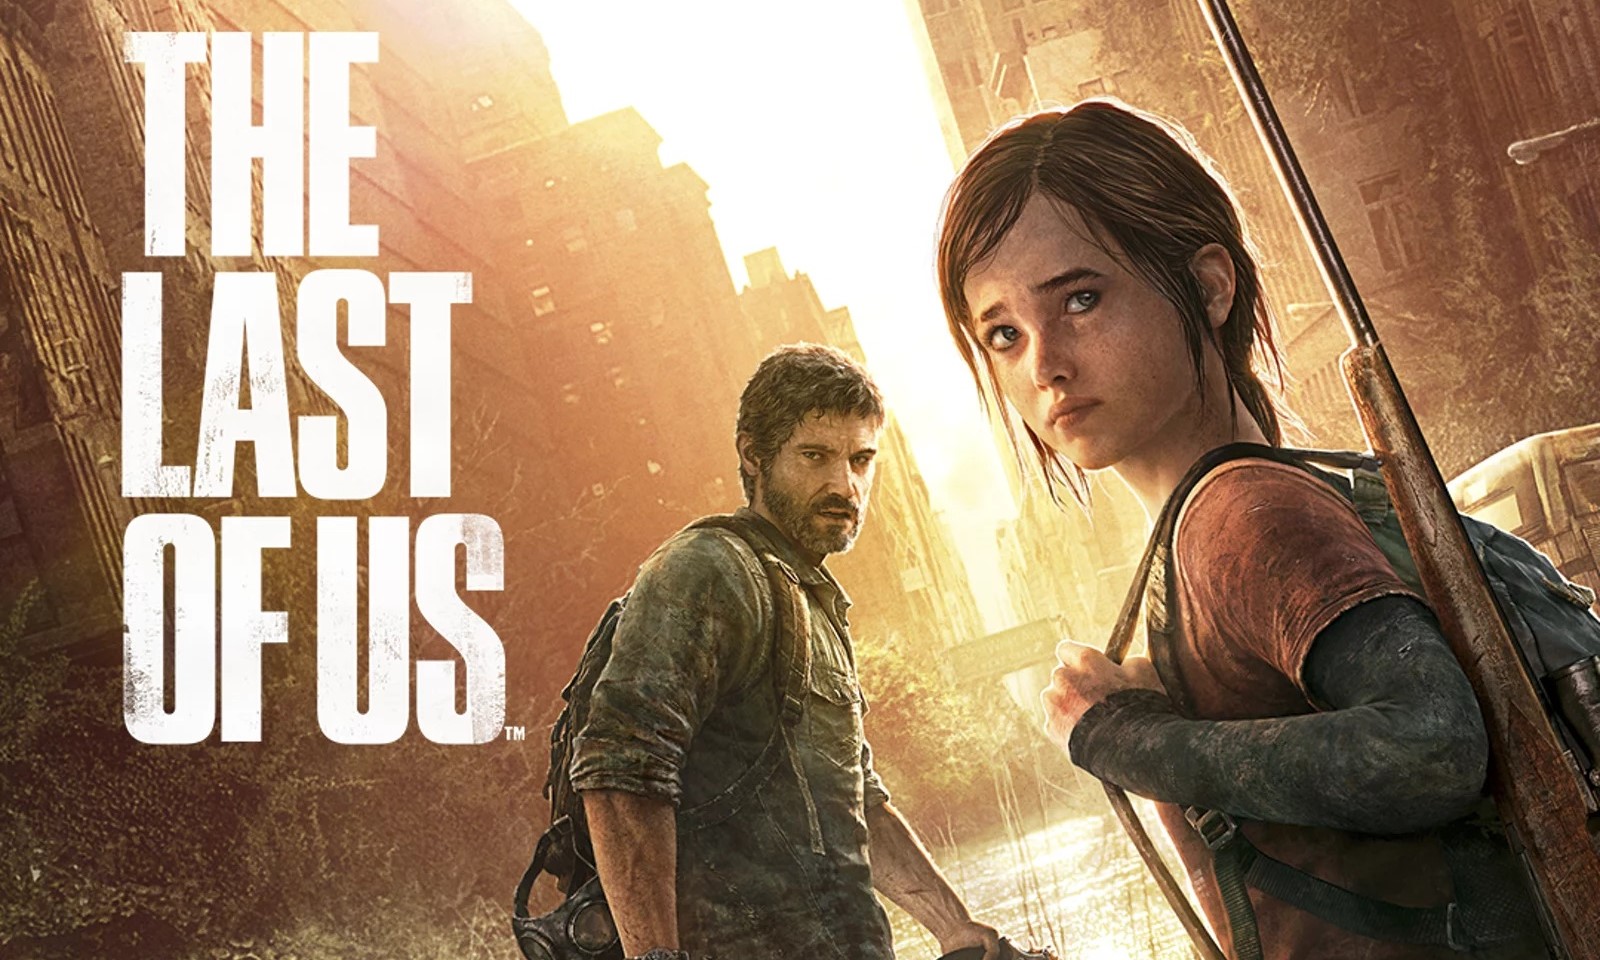 Last best games. The last of us Remastered.